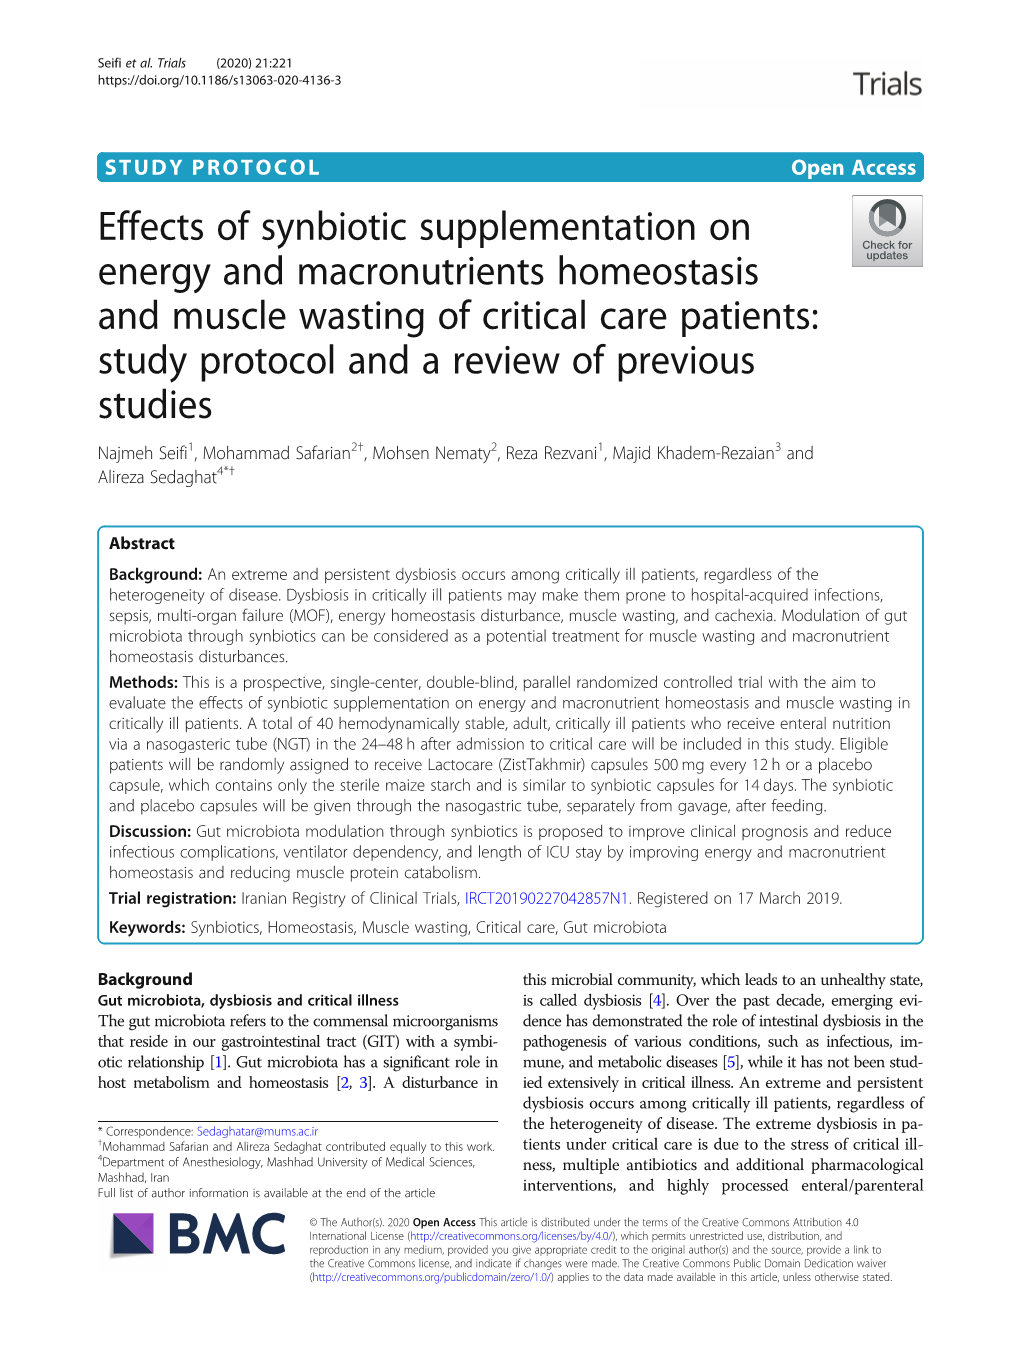 Effects of Synbiotic Supplementation on Energy And